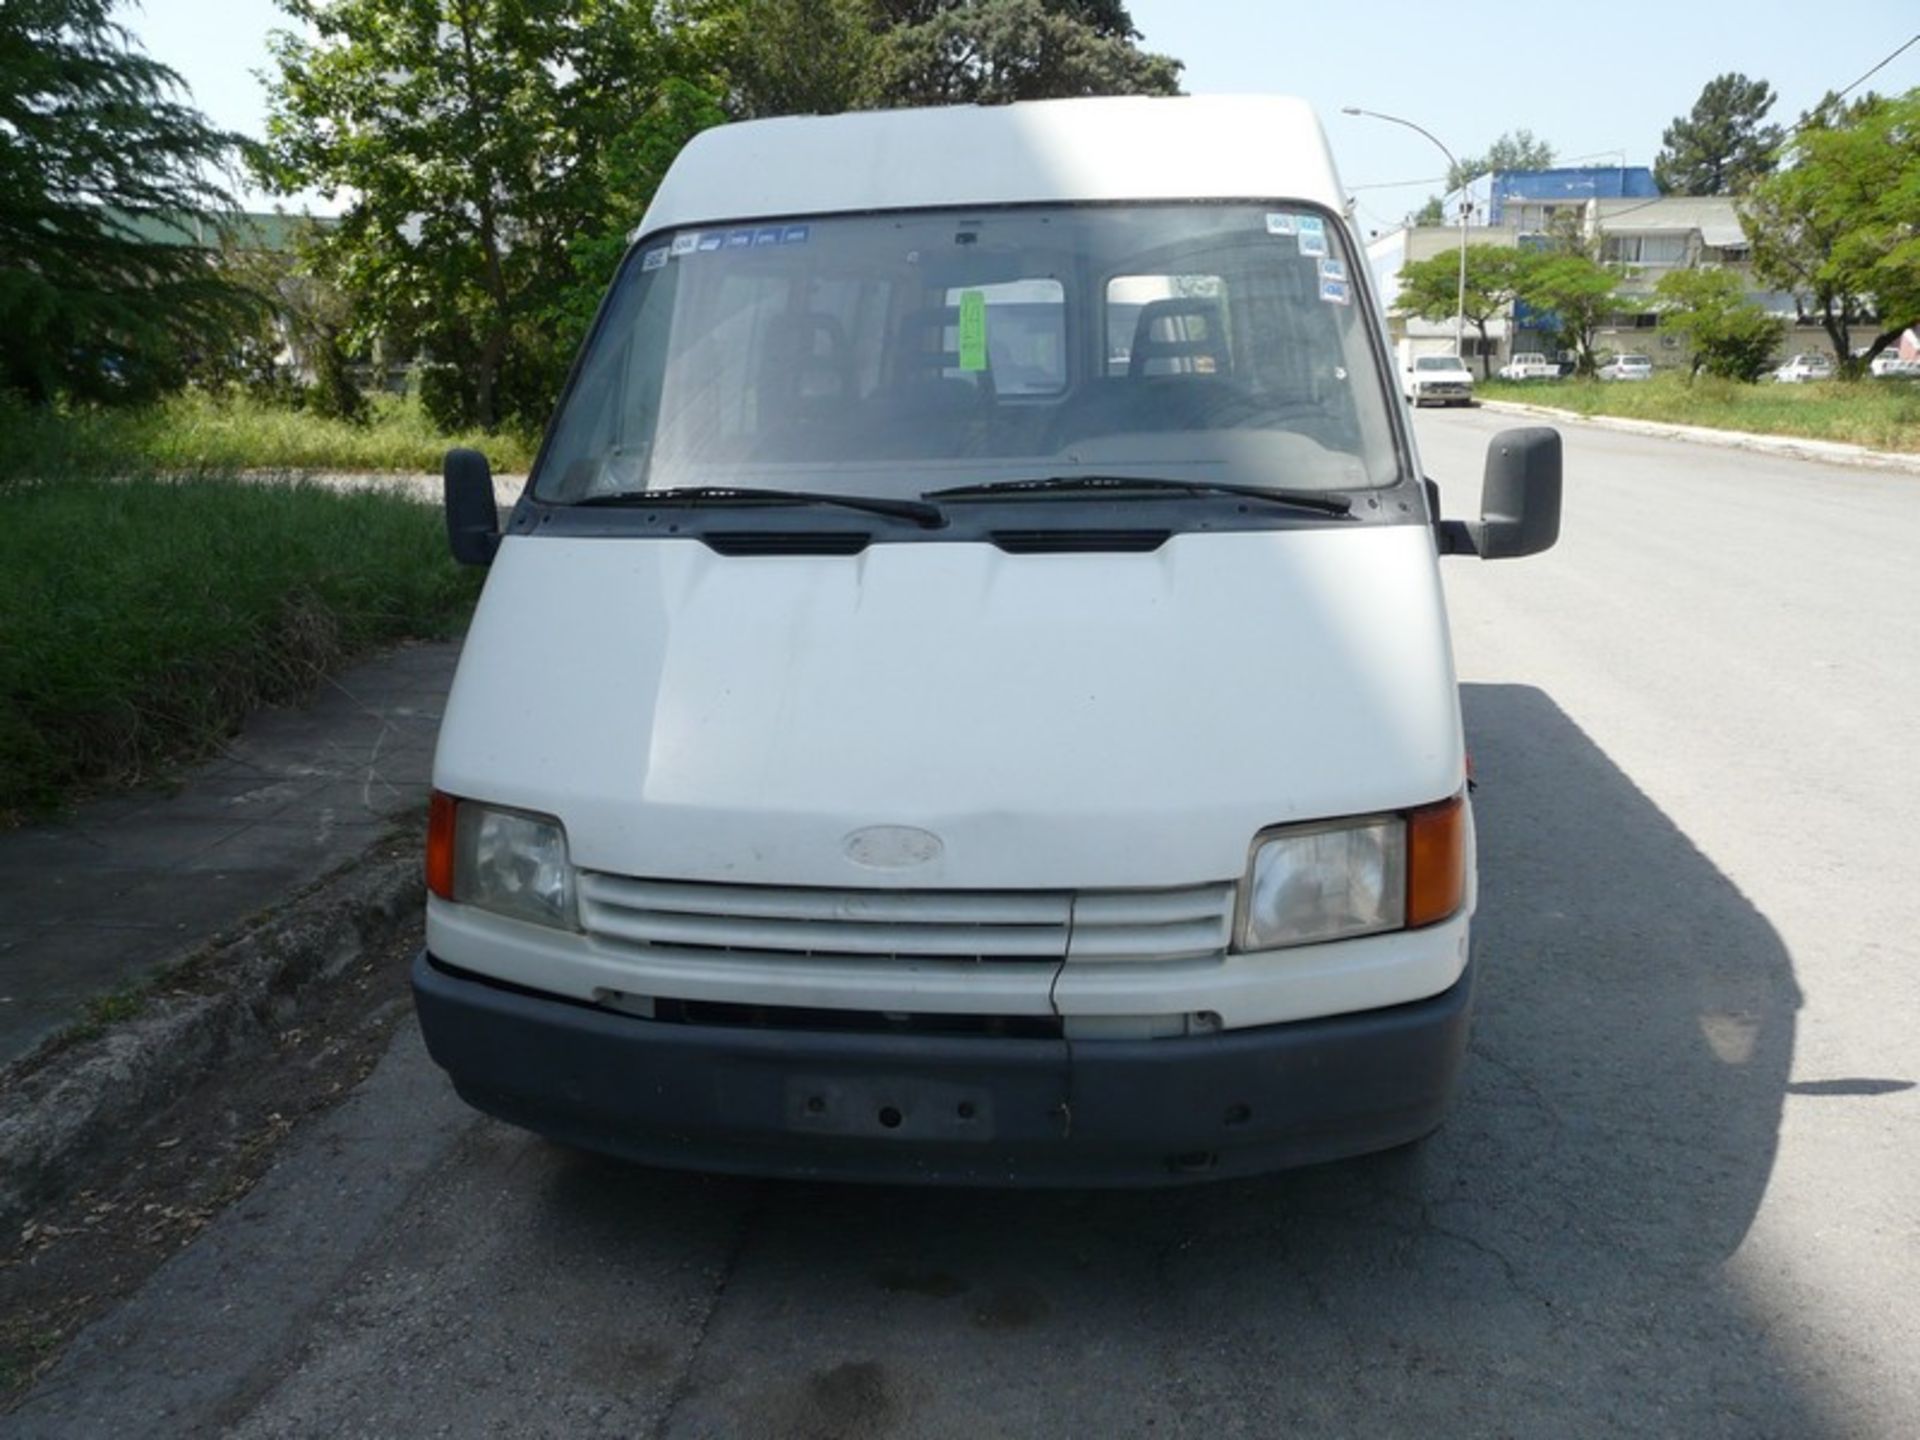 FORD TRANSIT, bus115, diesel, KM 212503, 14+1 seats, REG NBB 8161, Year: 1991 (Located in Greece - - Image 2 of 10